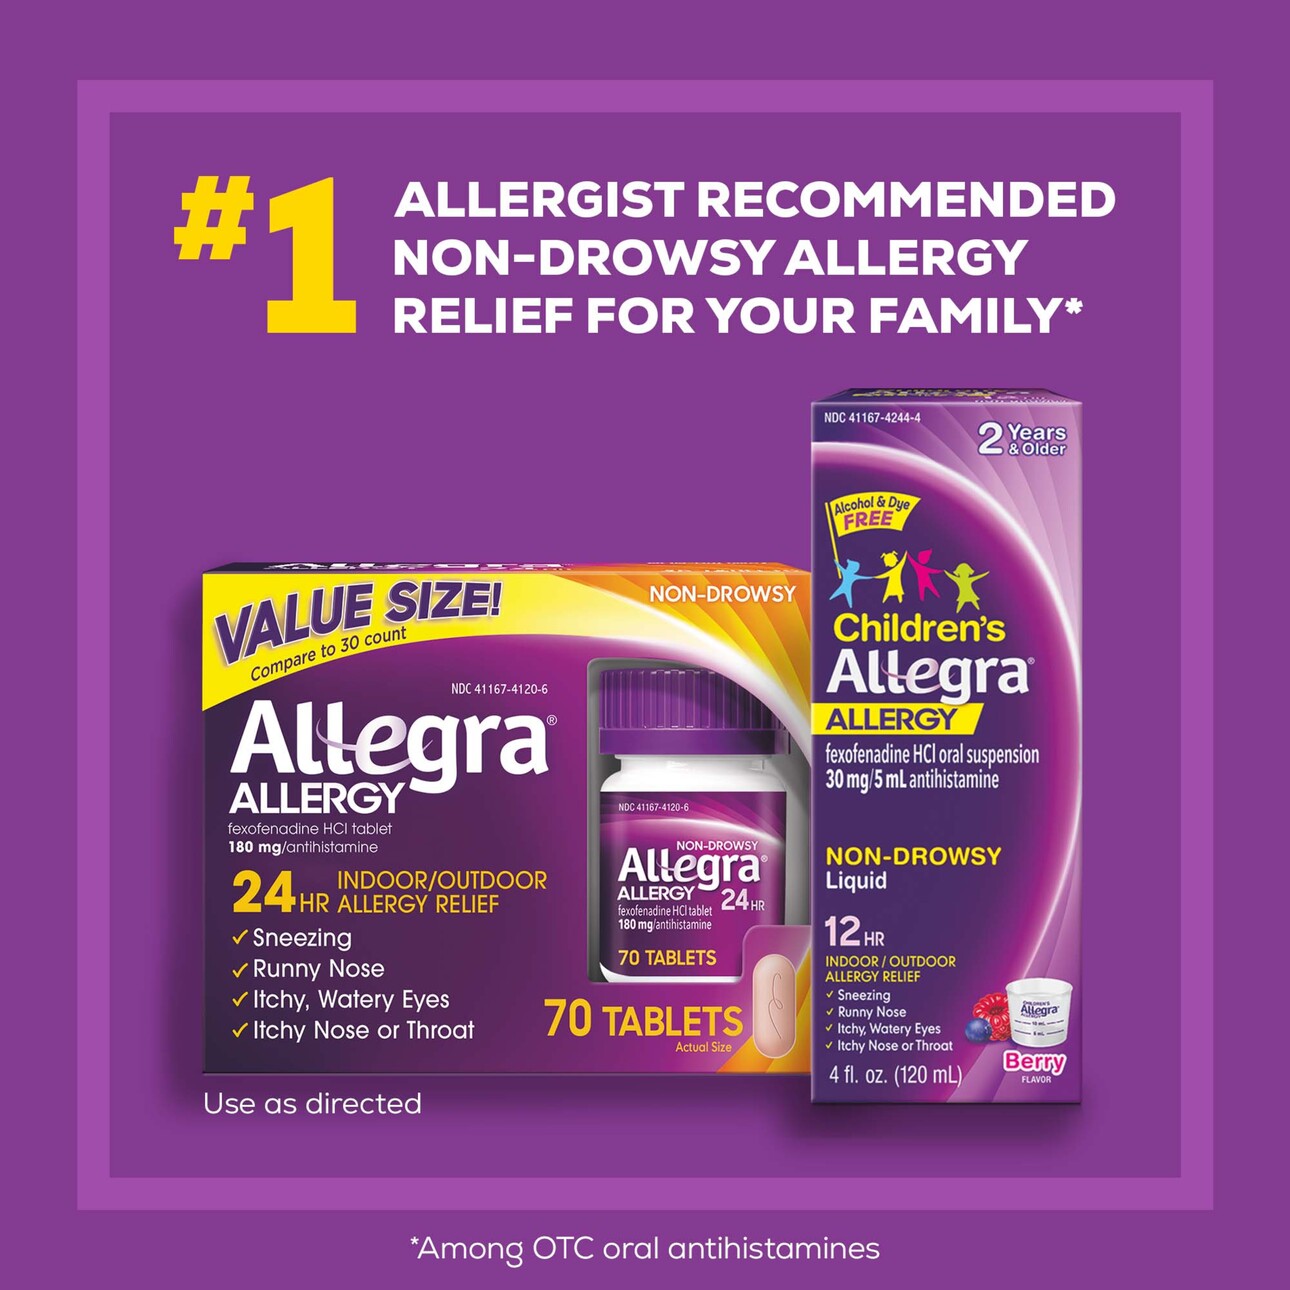 Allegra 24 Hour Non-Drowsy Antihistamine Medicine Tablets for Adult Allergy Relief, Fexofenadine, 180 mg, 70 Pills - image 4 of 6